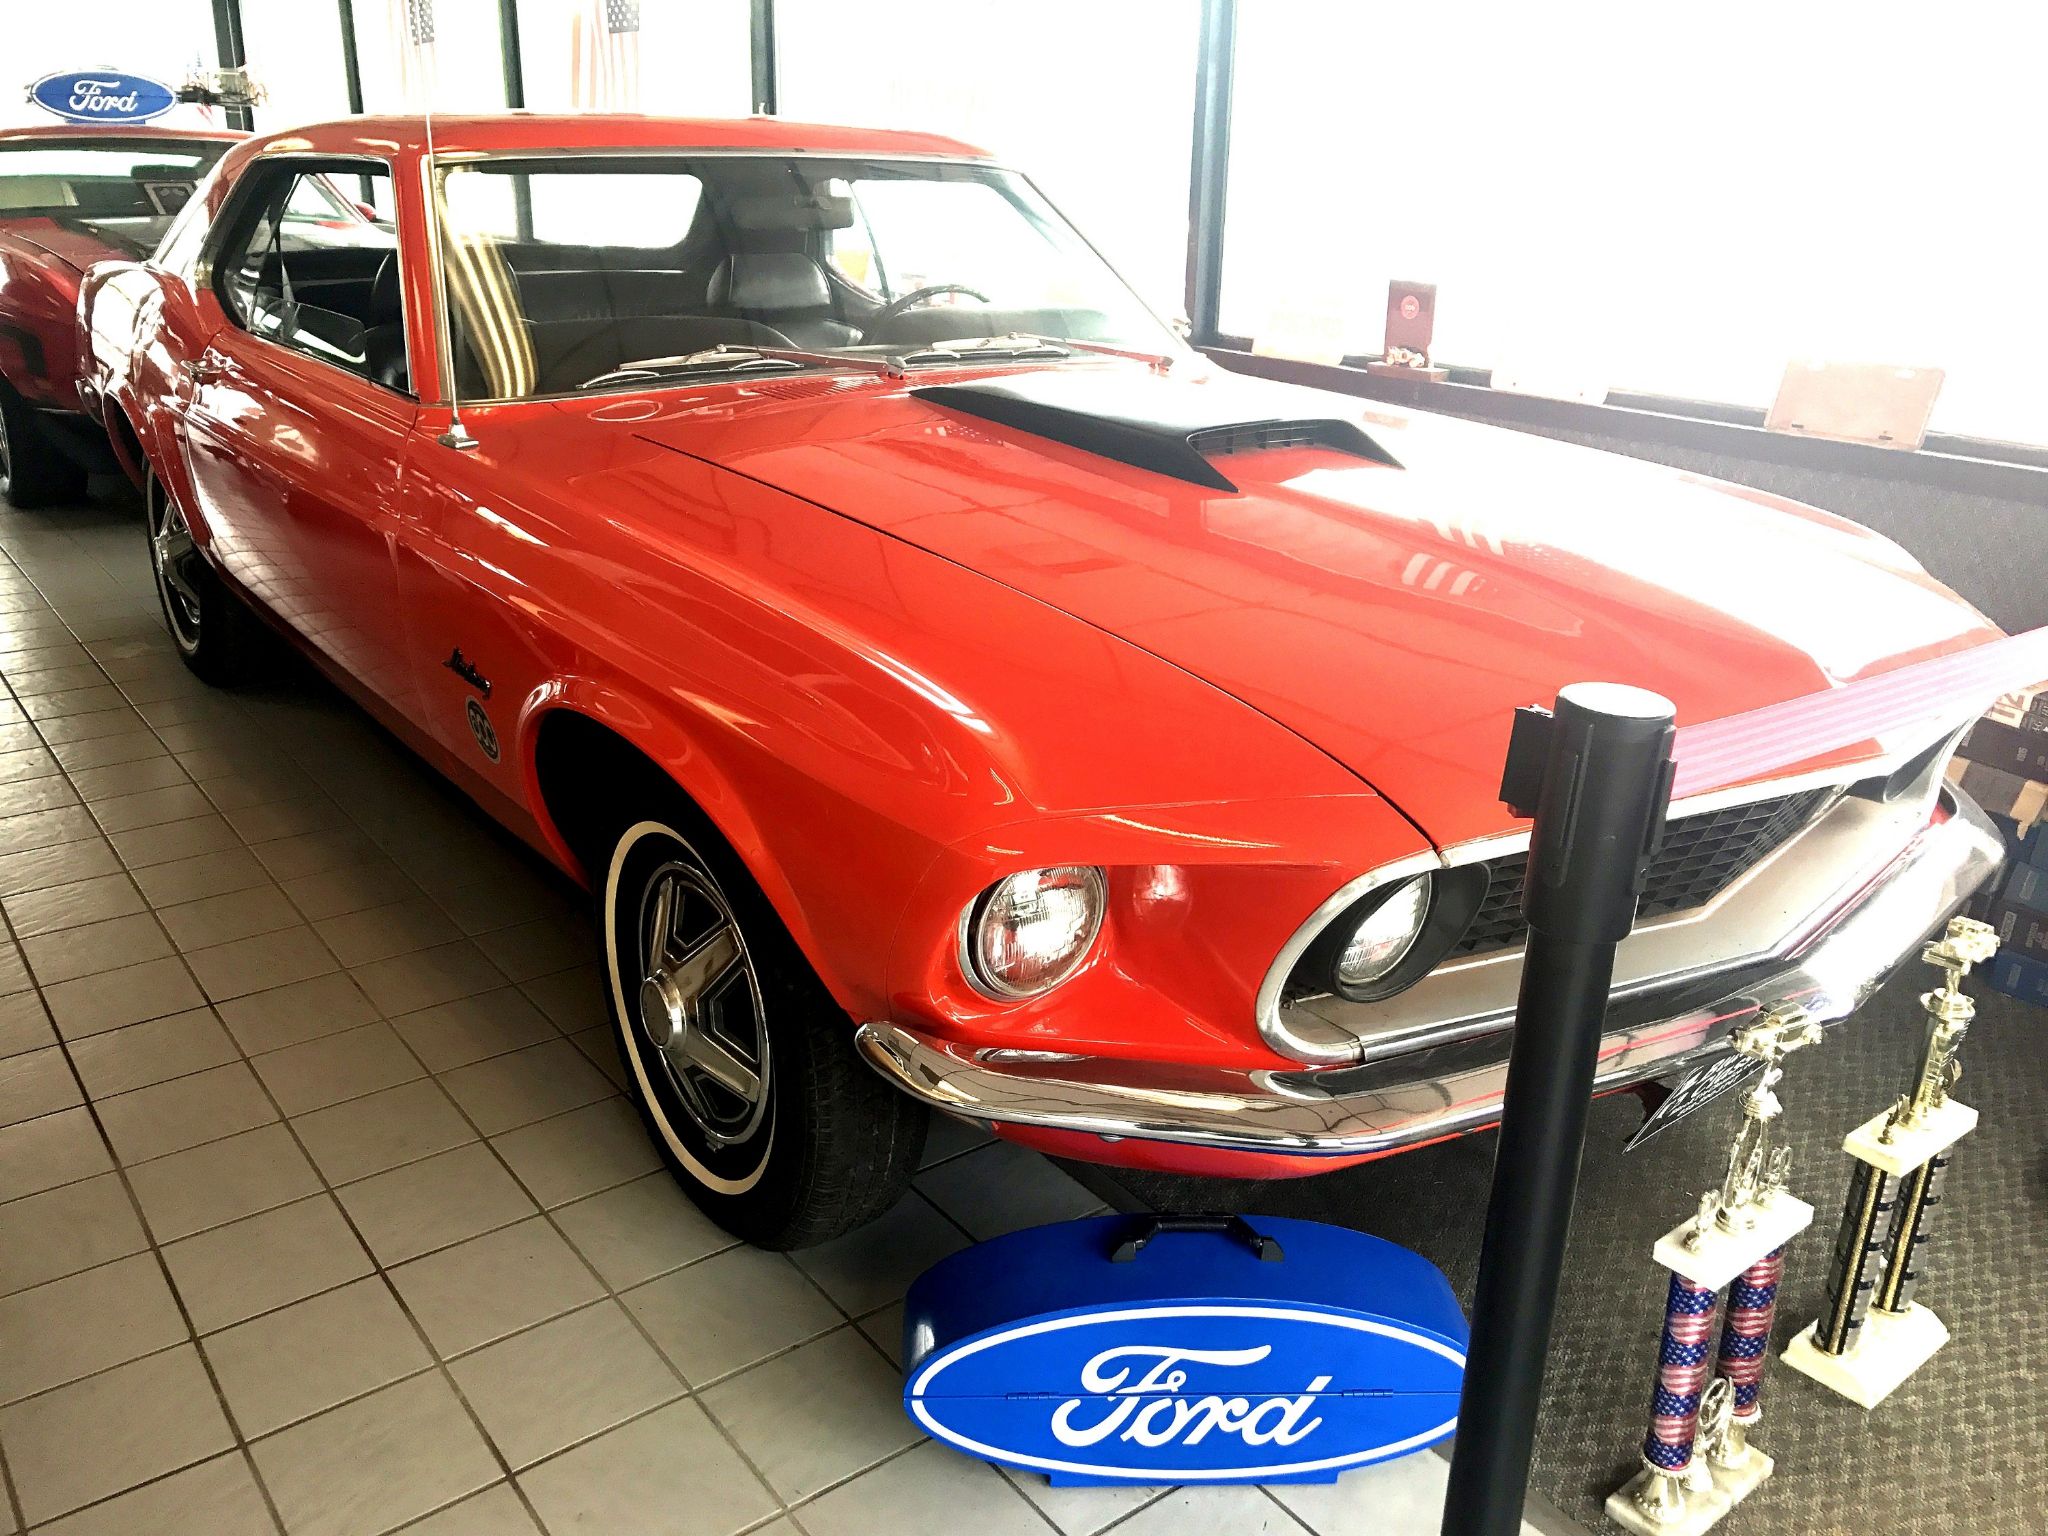  Ford Mustang Limited Edition  Original Promo